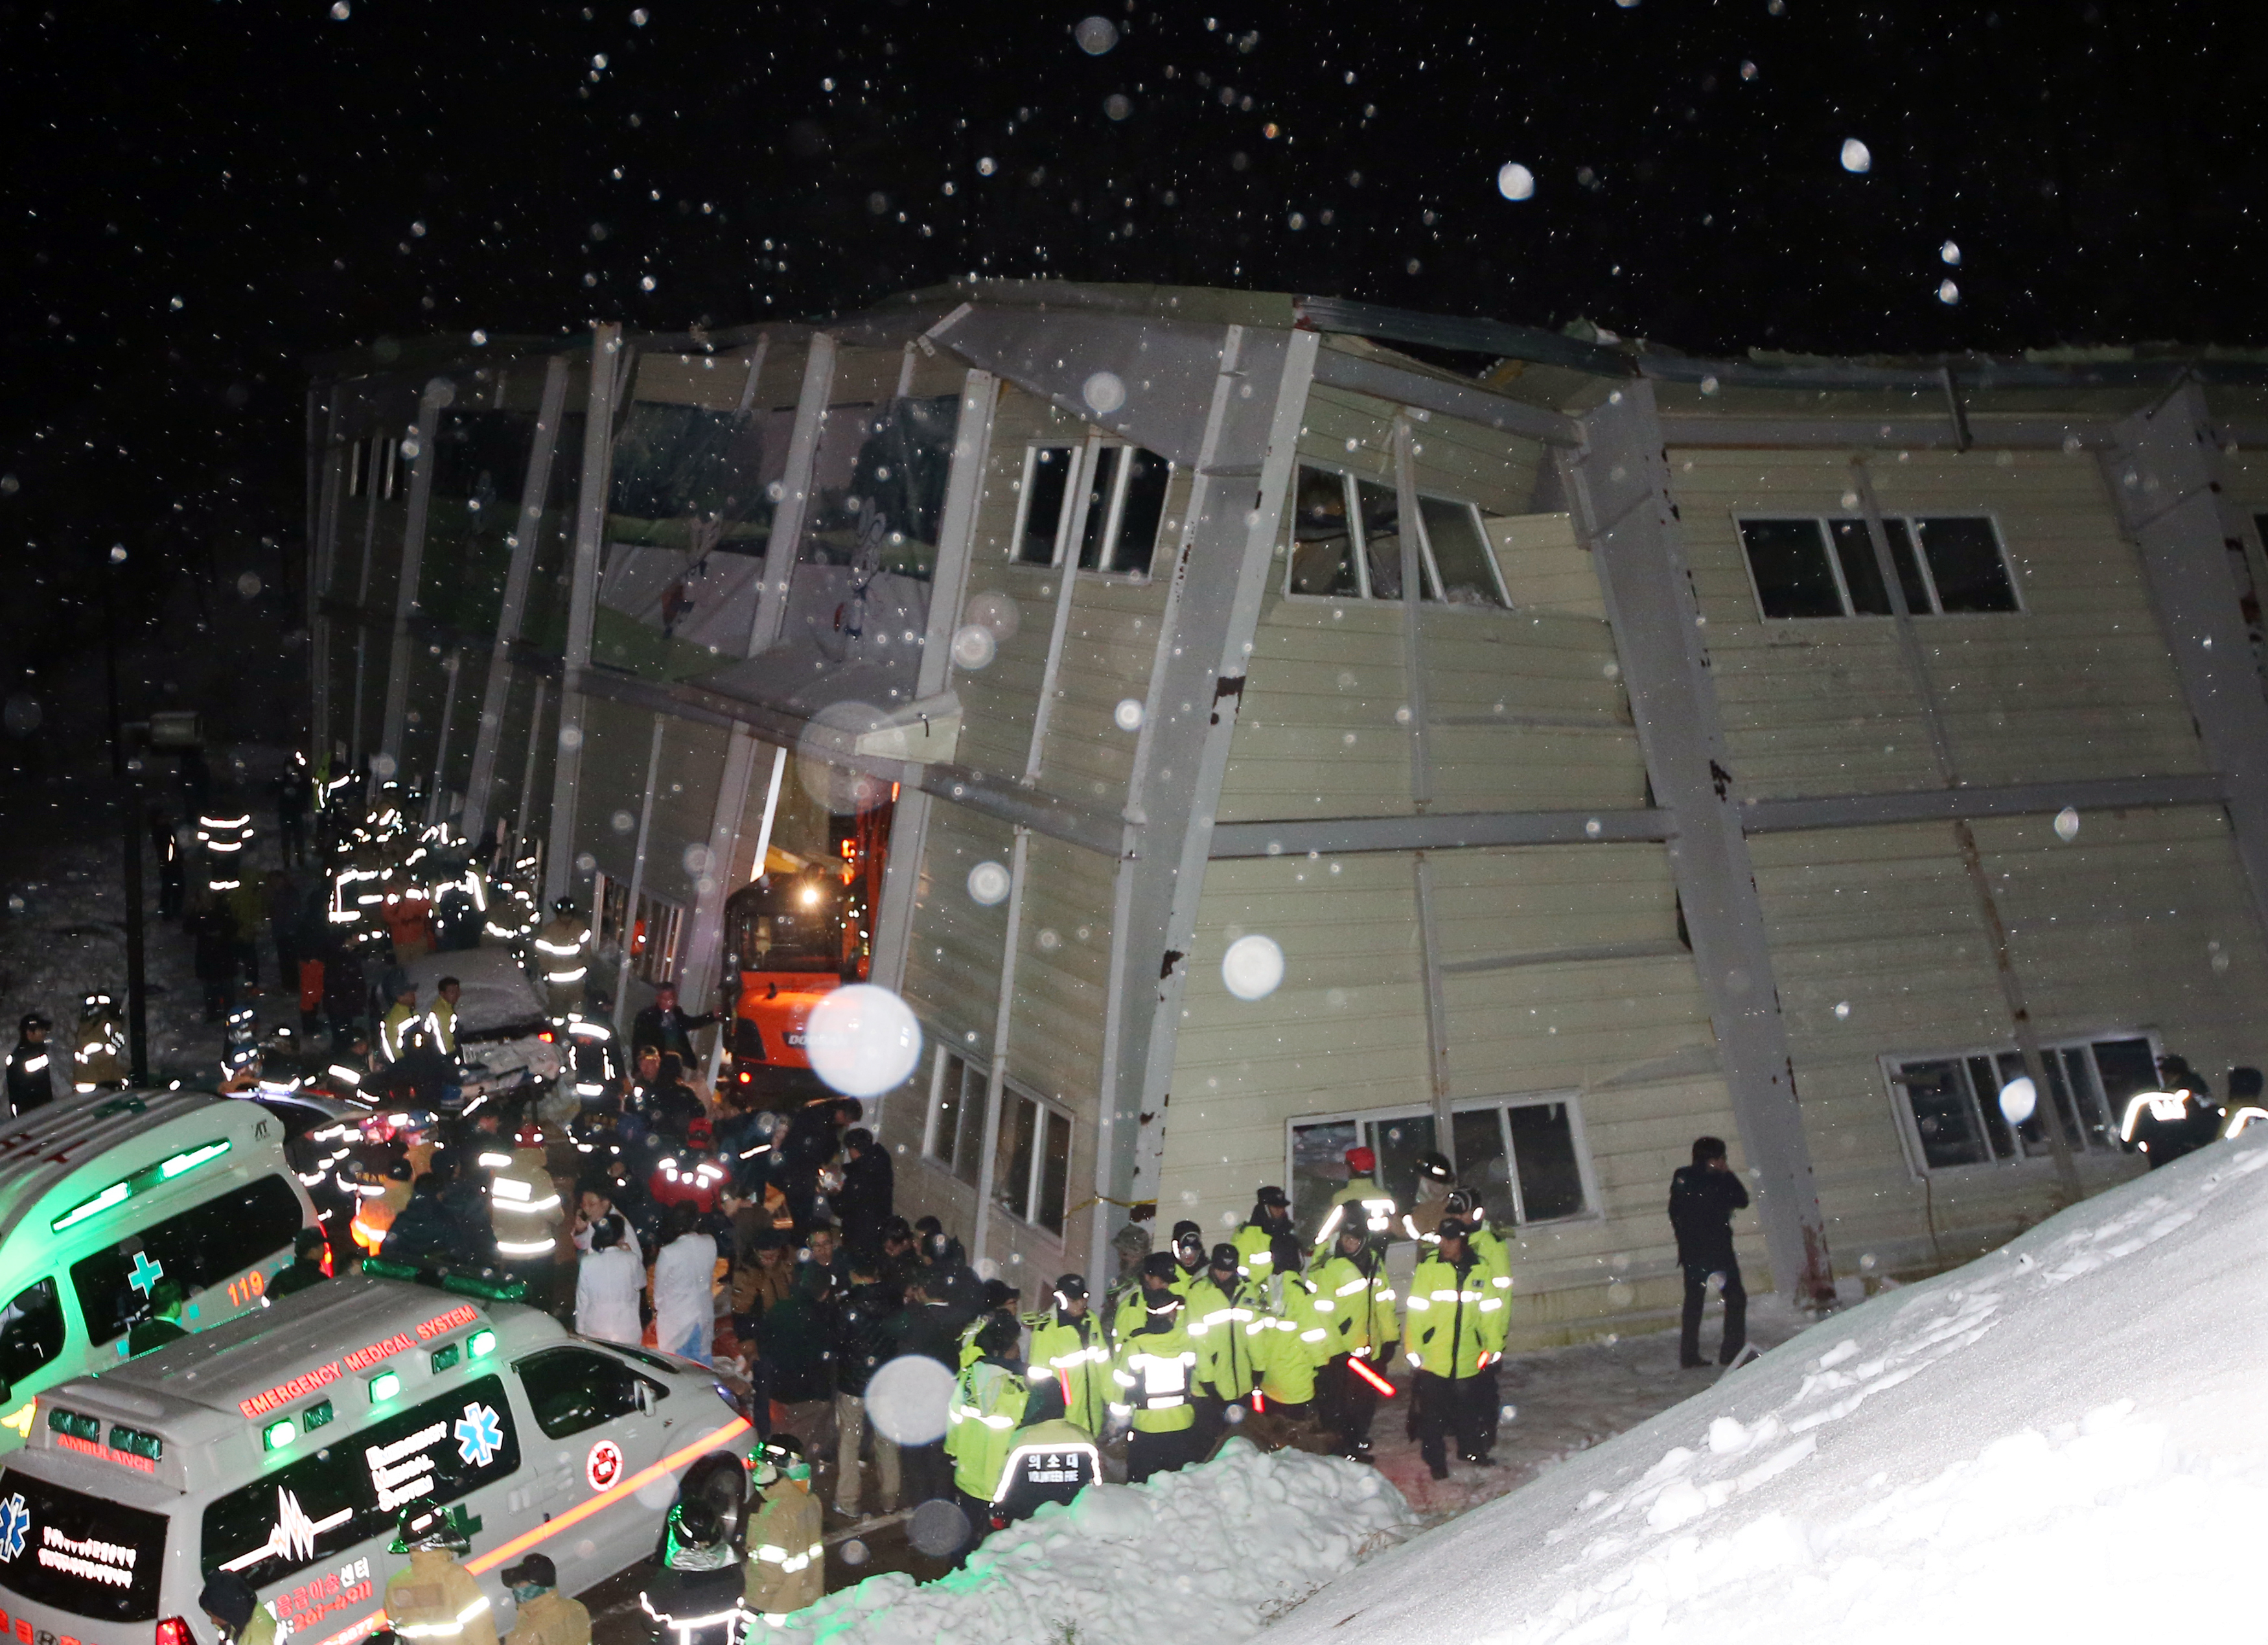 Rescue workers search for survivors from a collapsed resort building in Gyeongju, South Korea, Monday, Feb. 17, 2014.  (Yonhap)